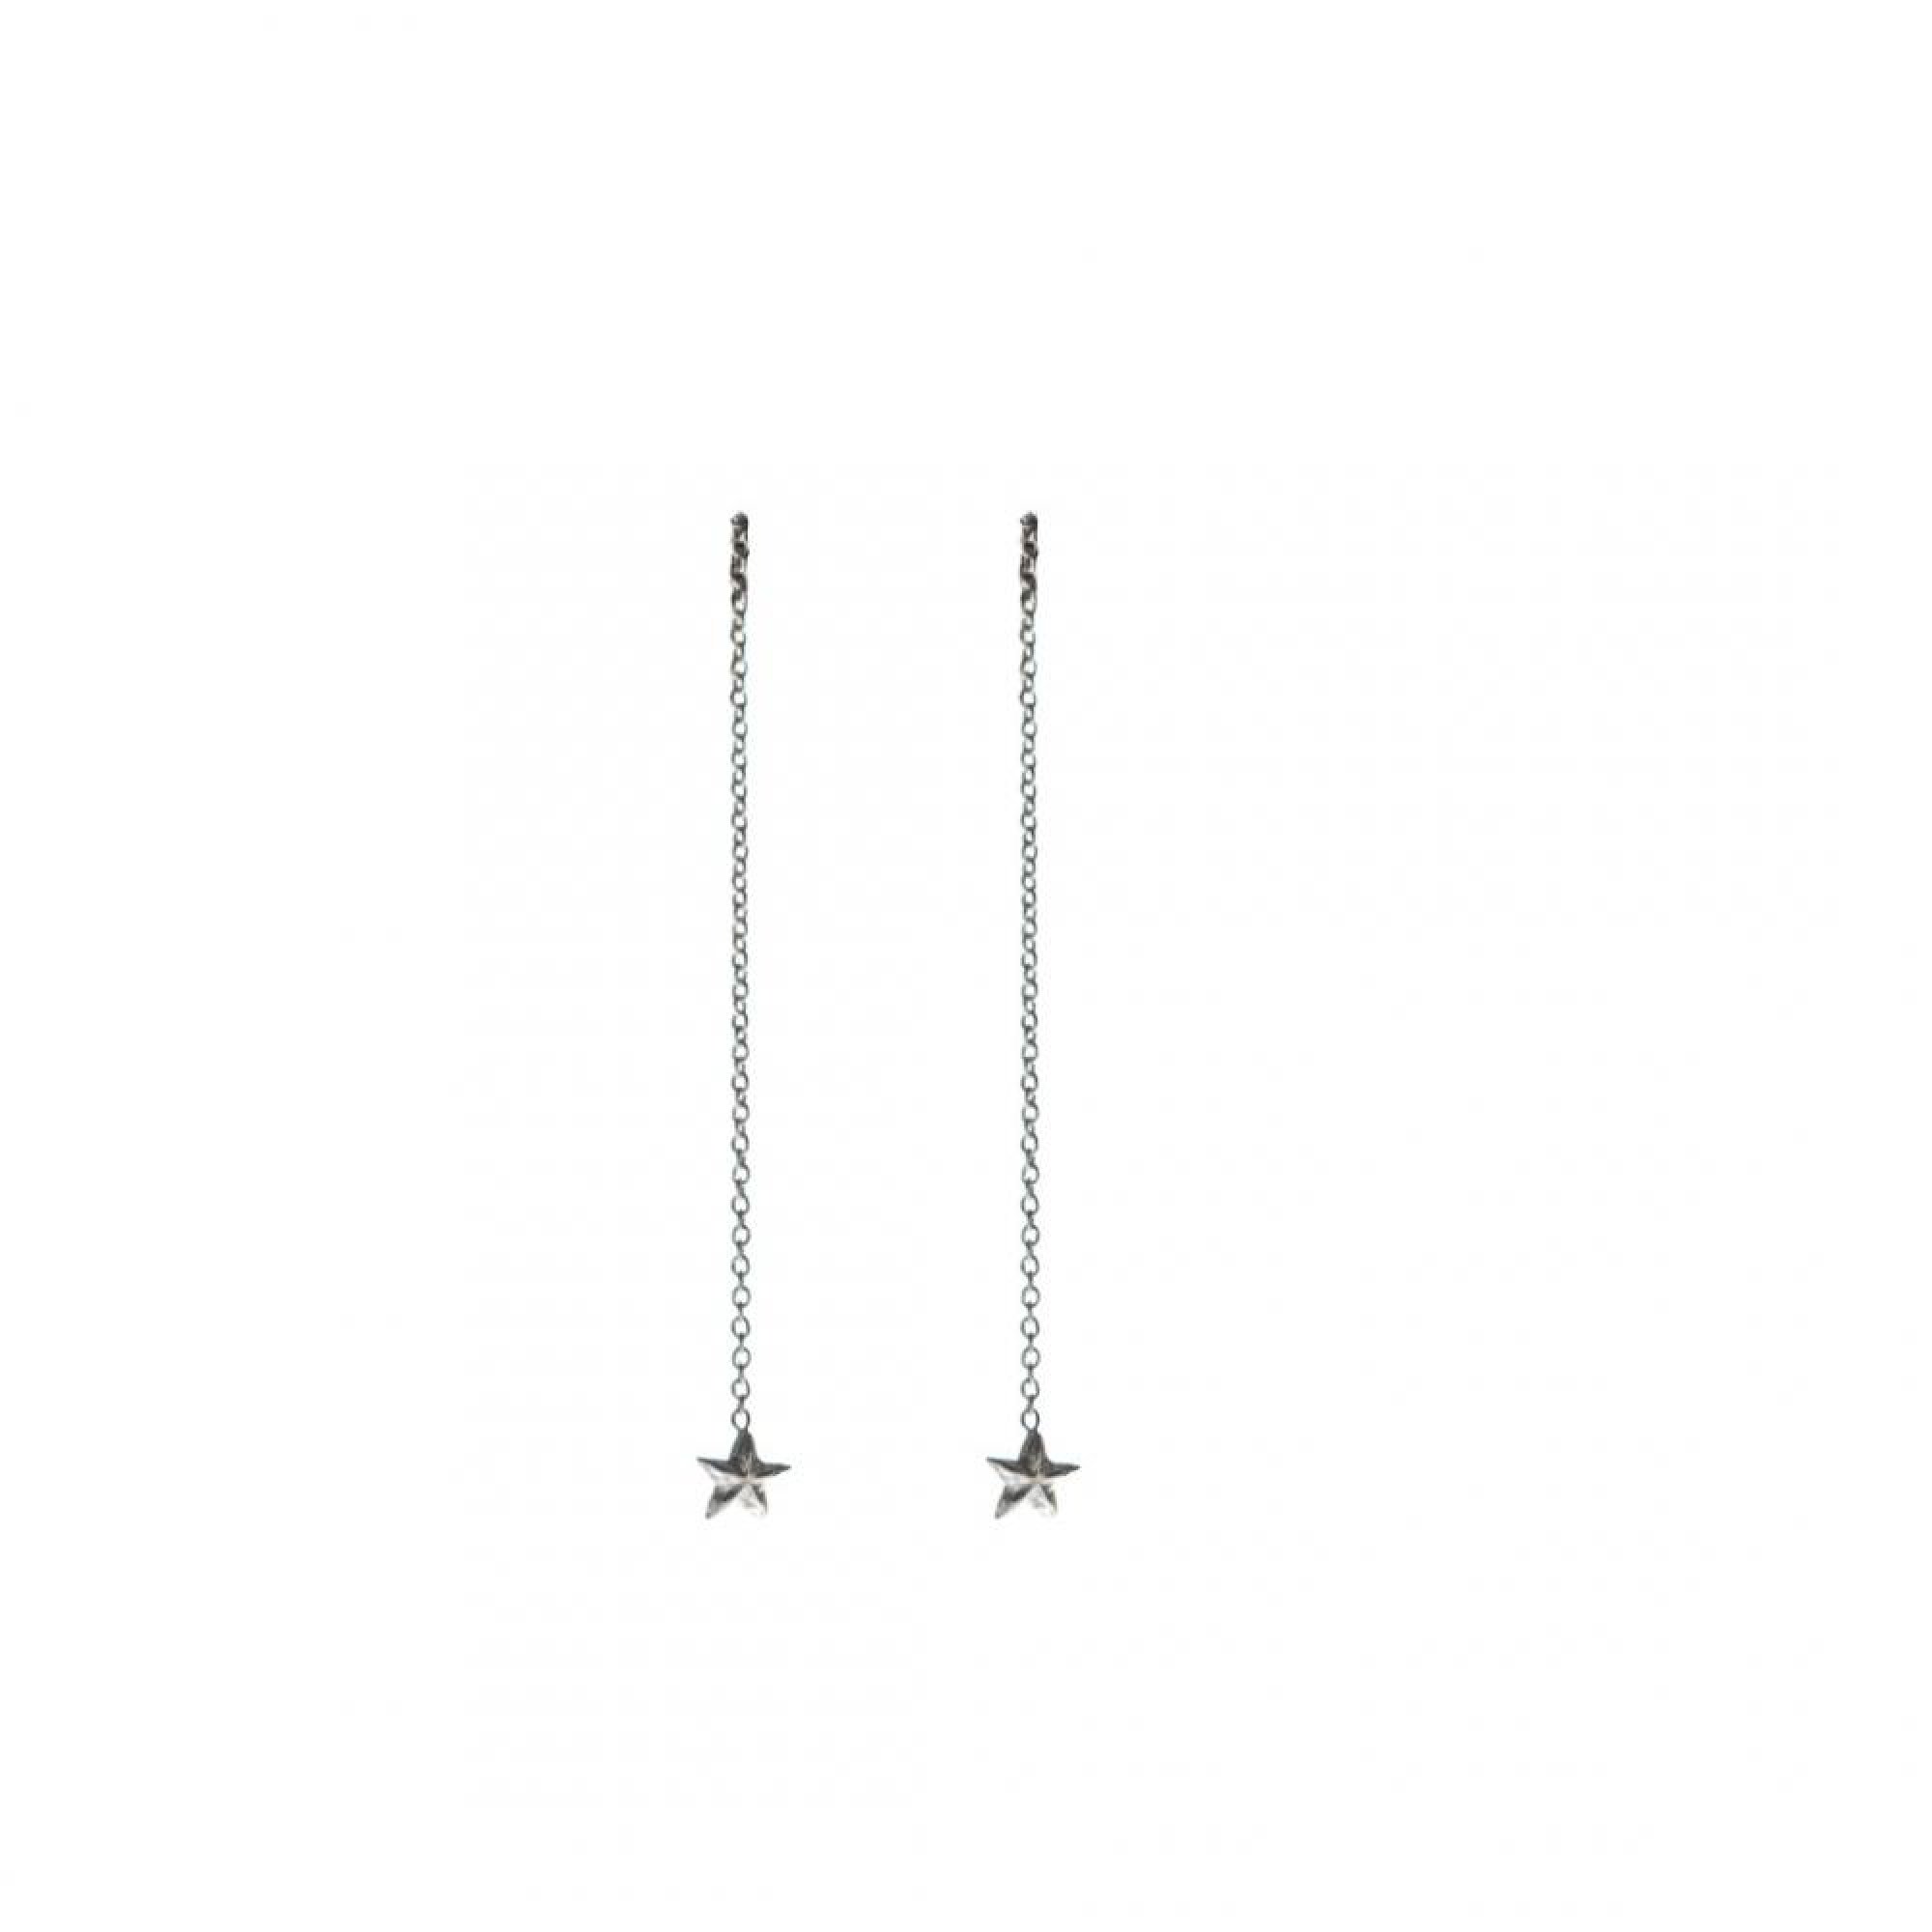 Chain earrings with a star